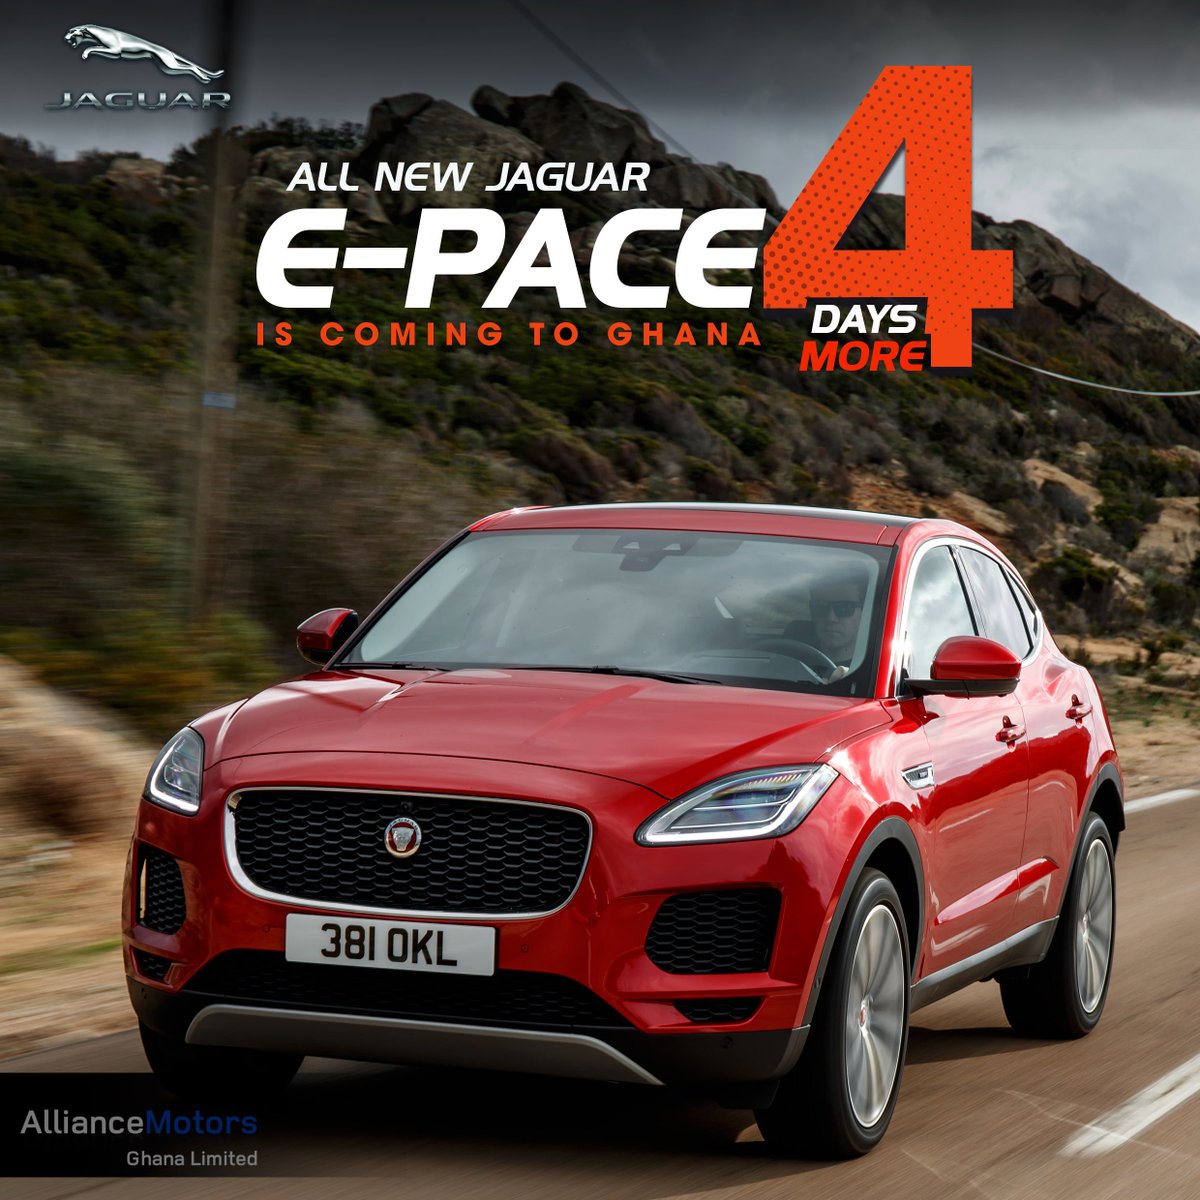 #4. For a tailored driving experience, JaguarDrive Control allows drivers to select Normal, Eco, Dynamic or Winter mode – each subtly changing the steering and throttle mapping.